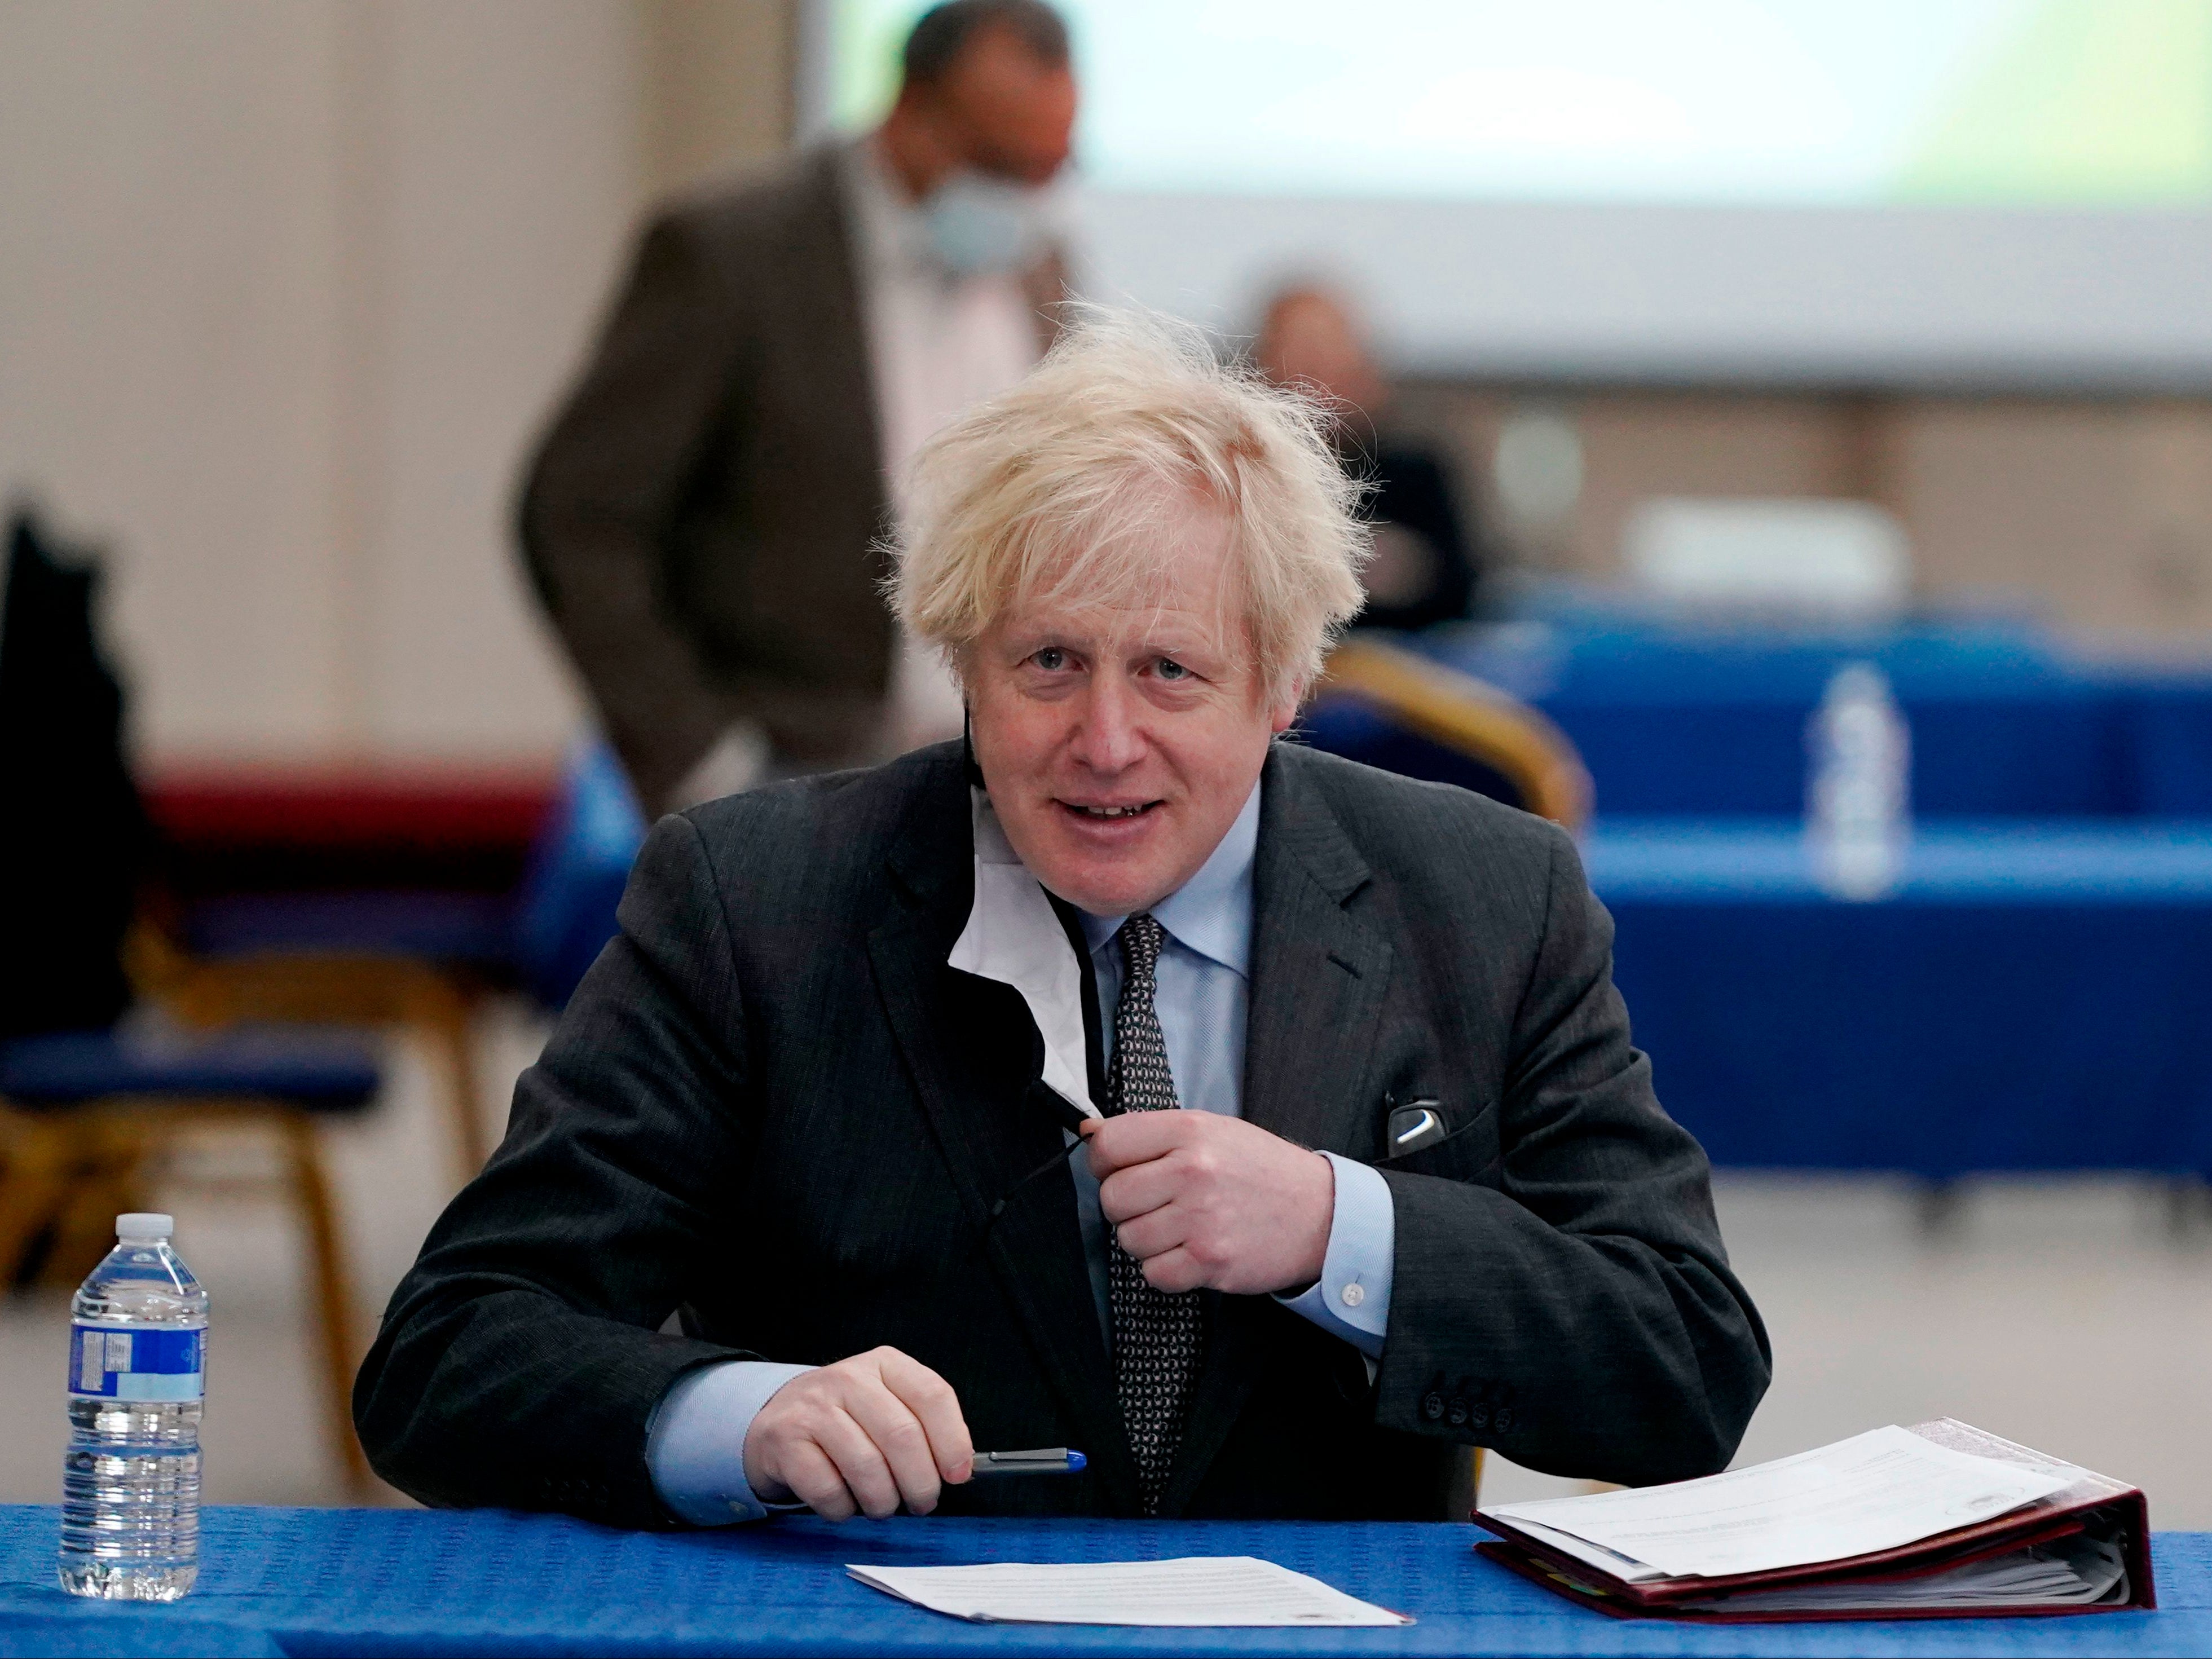 The CRG is irrelevant so far as Covid is concerned, but perhaps not so much for the political career of Boris Johnson